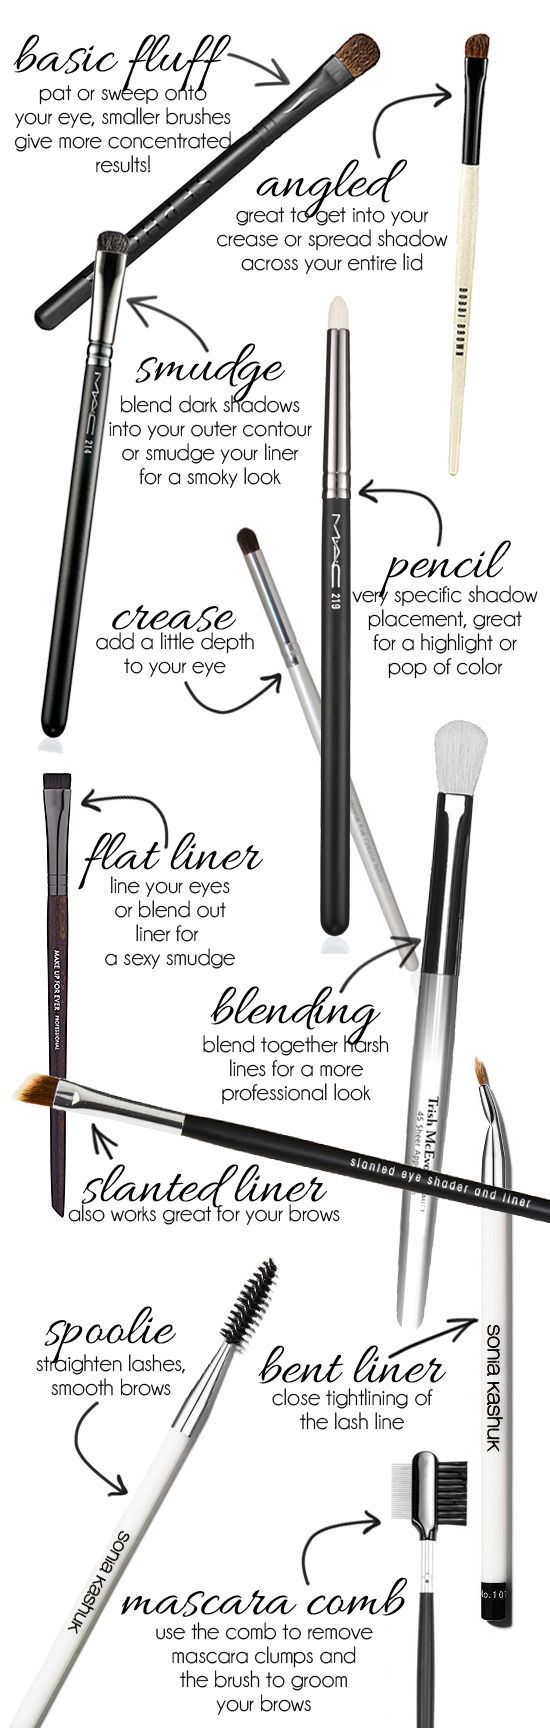 Im so bad with makeup, and this is really helpful!